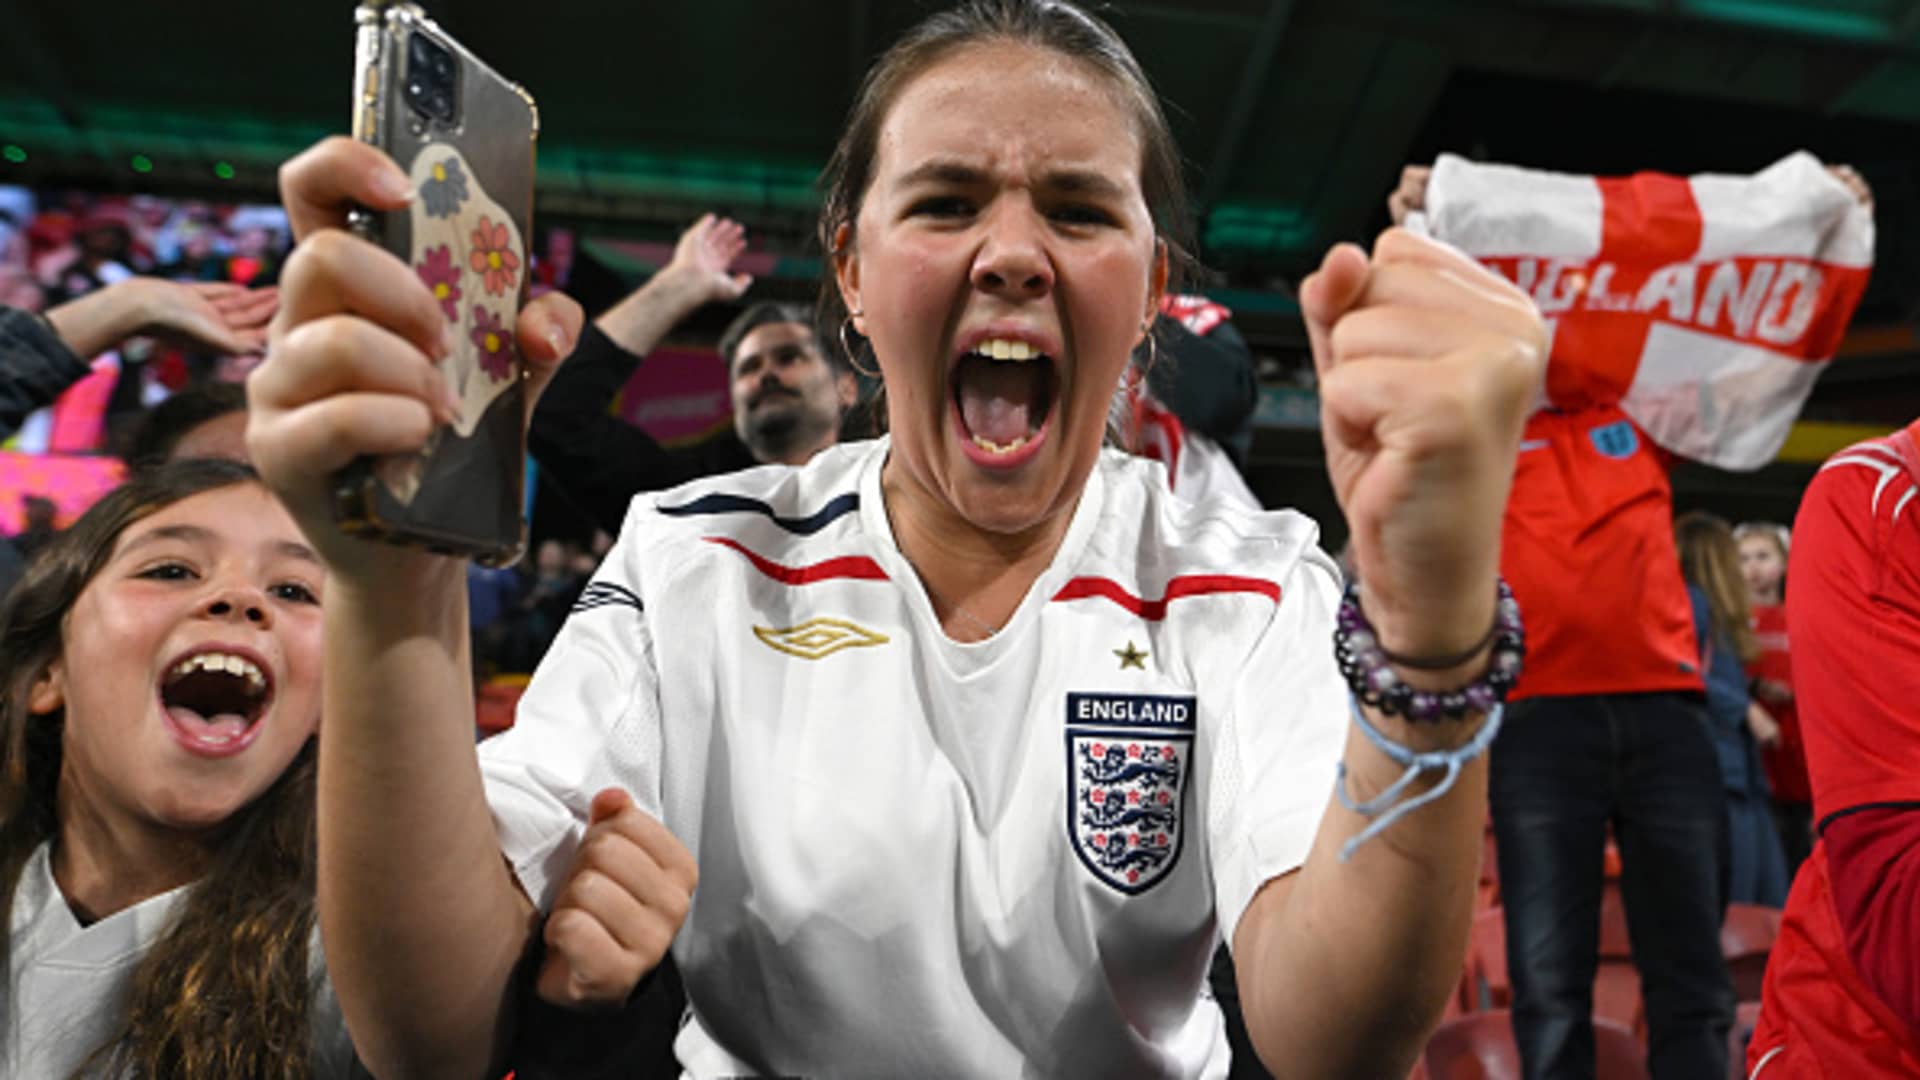 England fans celebrate in Brisbane, Australia at the FIFA Women's World Cup on Aug. 07, 2023.